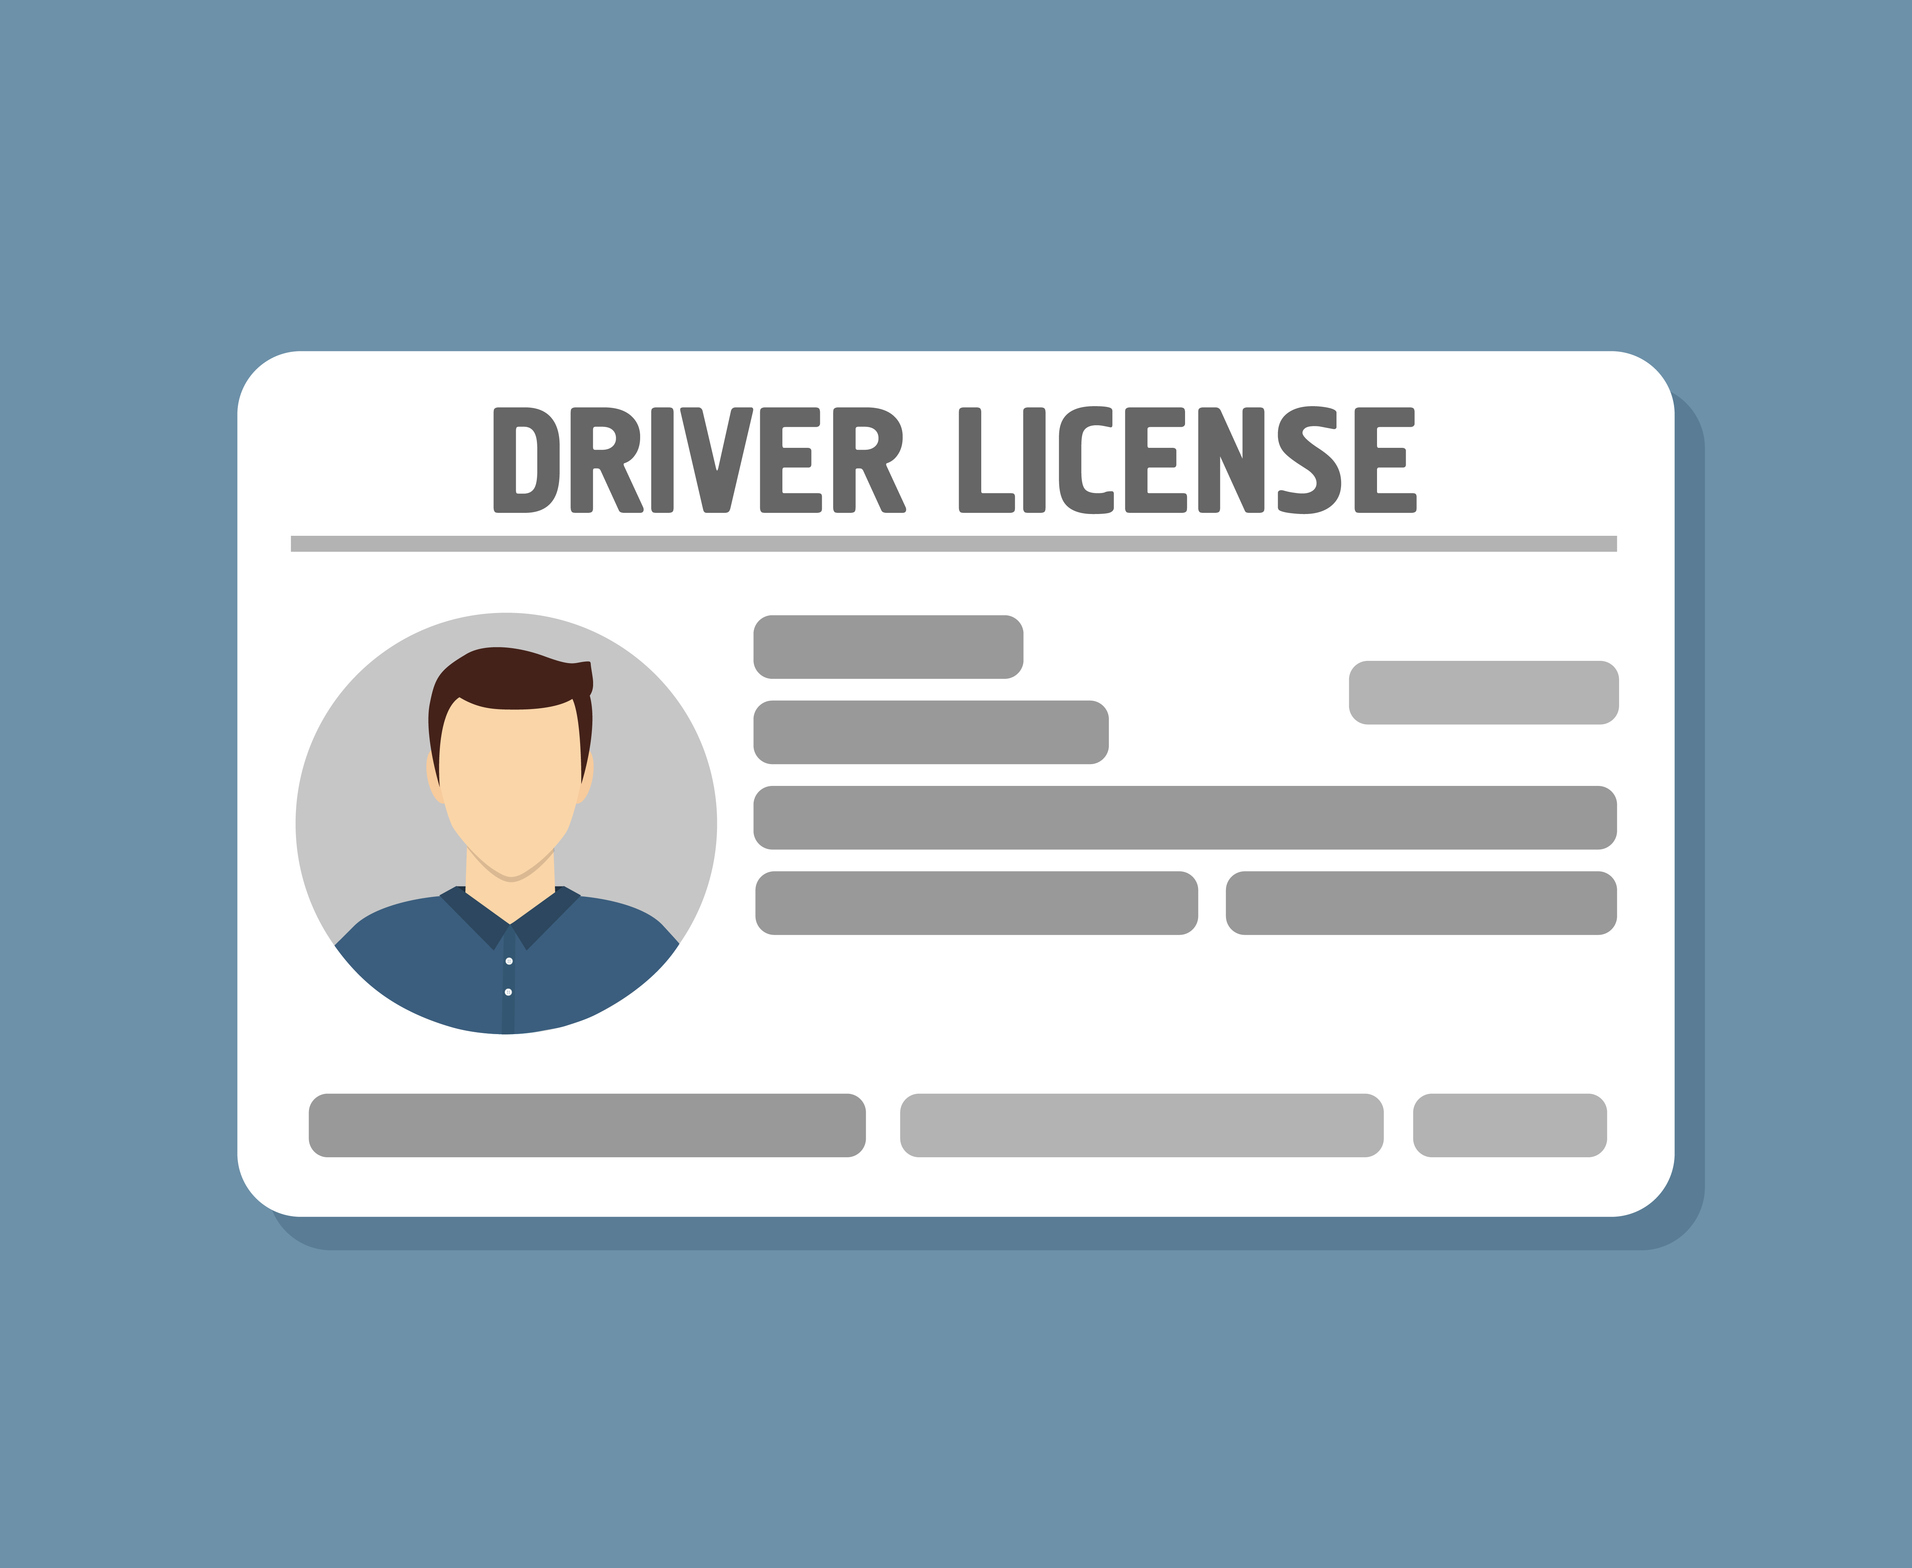 Drivers license graphic